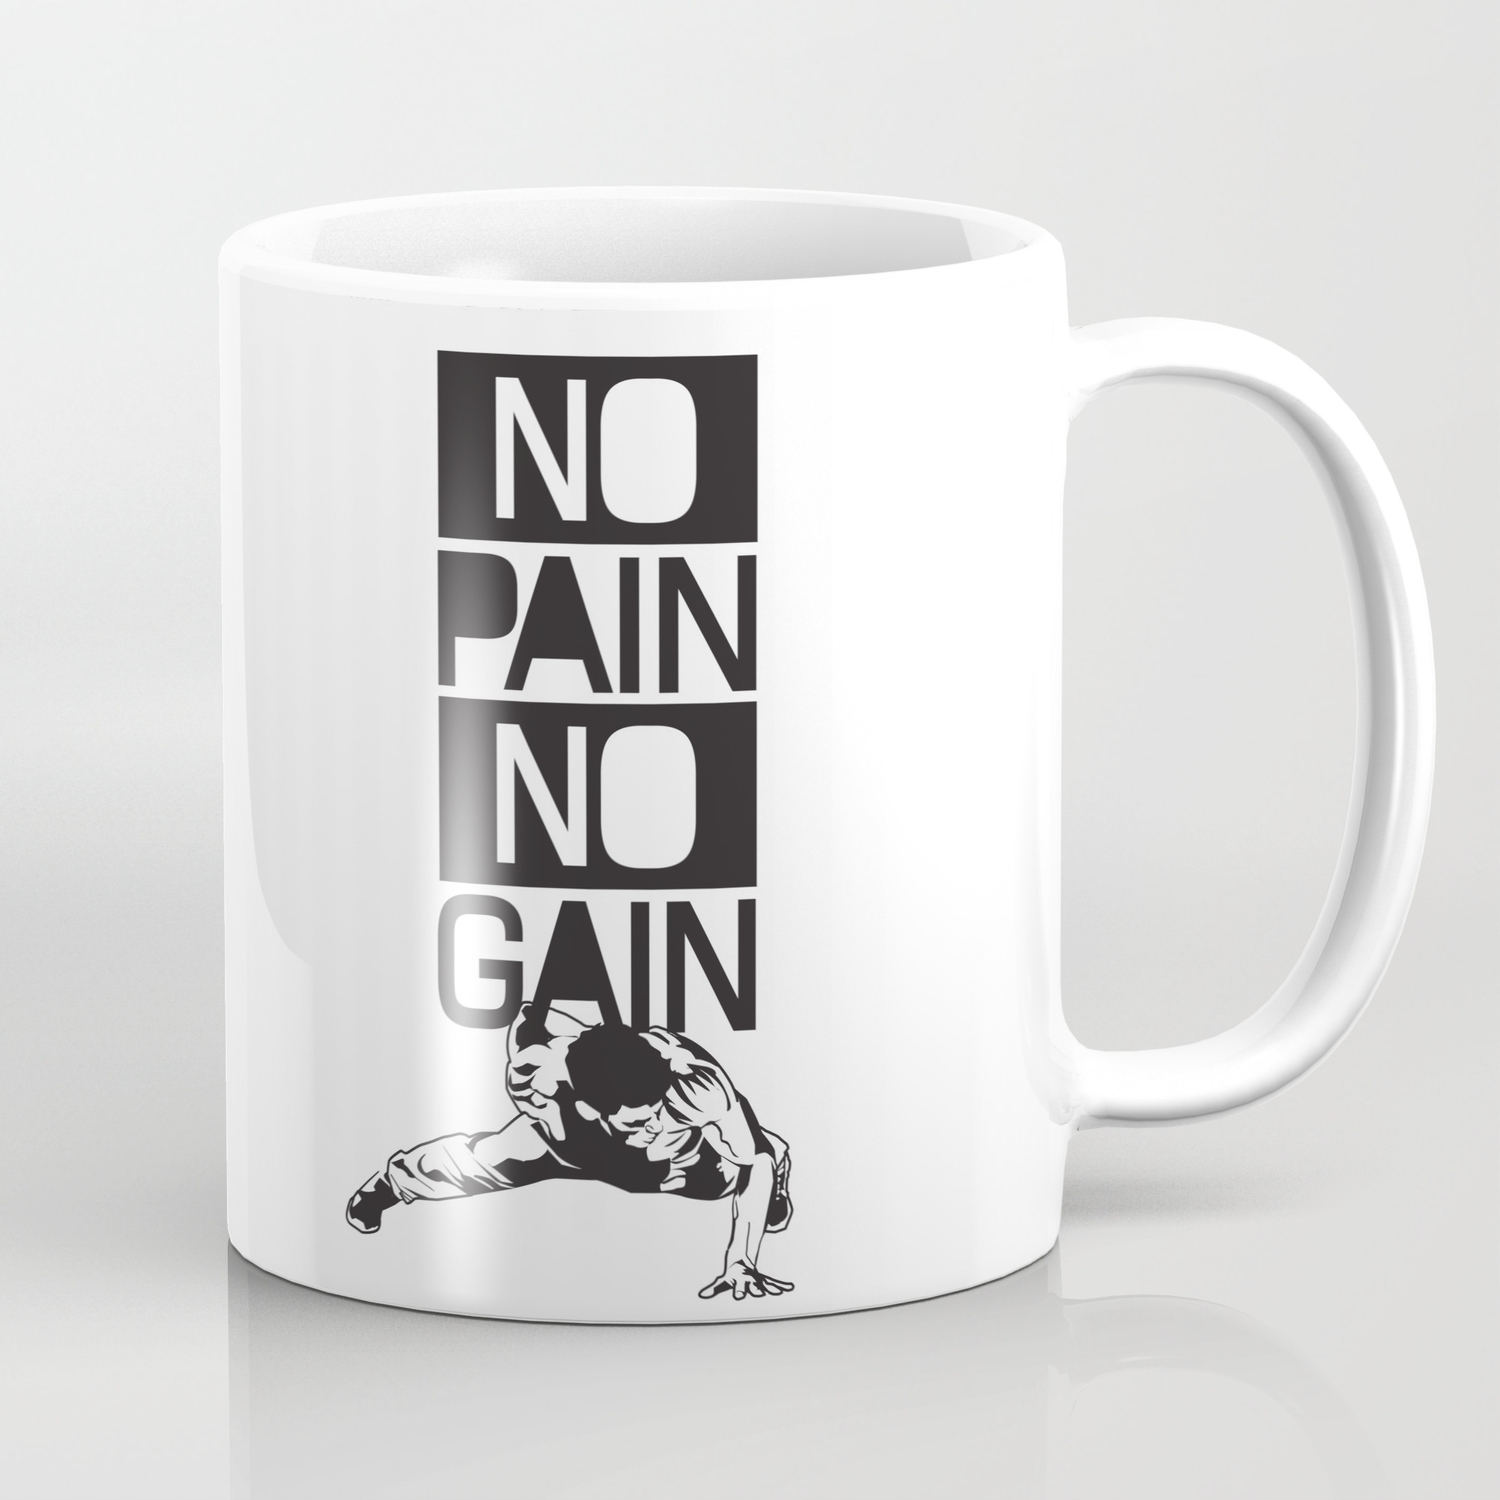 Fitness Coffee Gift Cute Pizza Cup Gift No Pain No Pizza Coffee Mug Gym Gift 